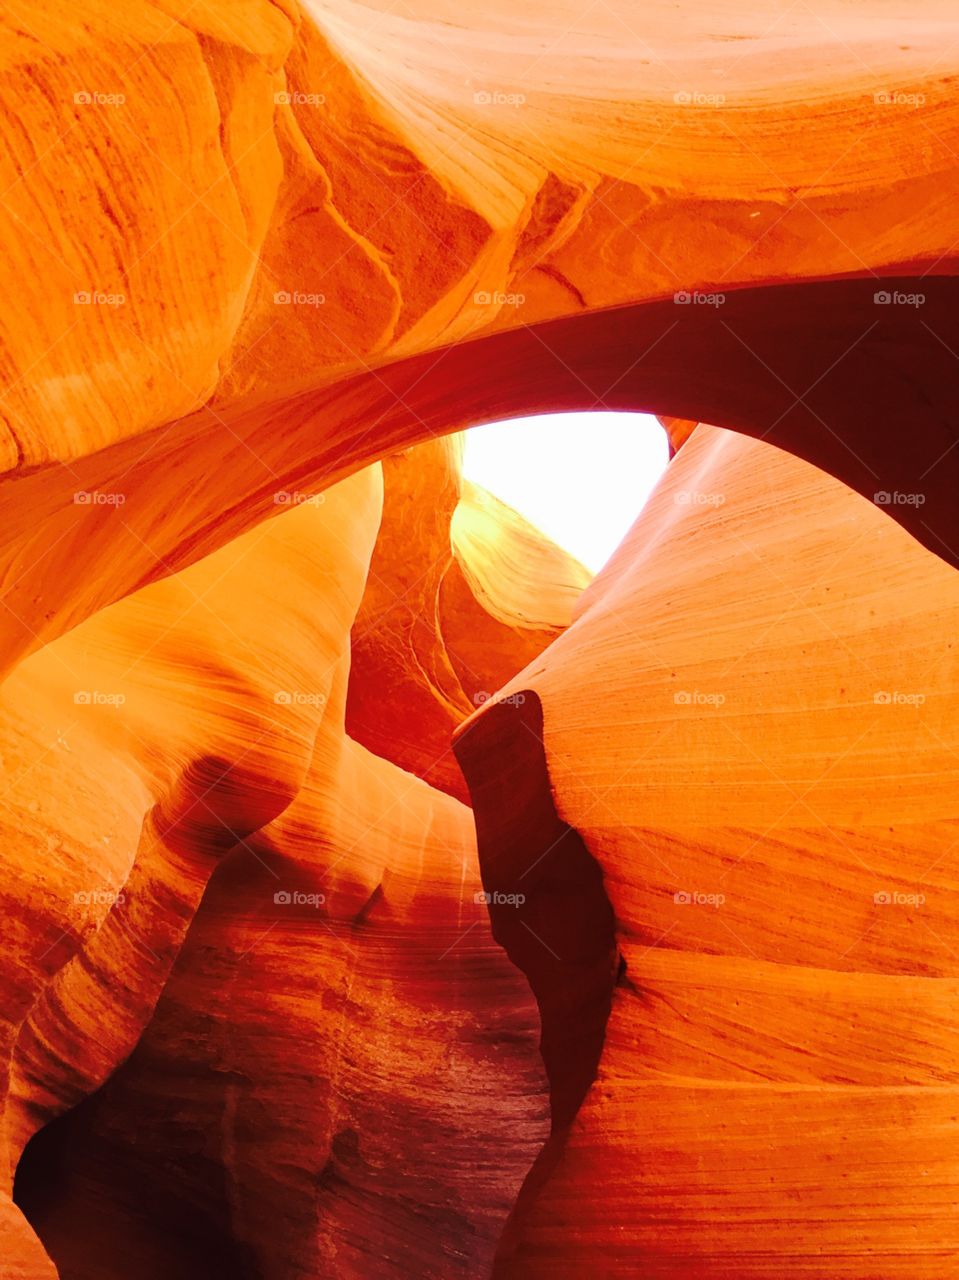 Arches in Antelope Canyon